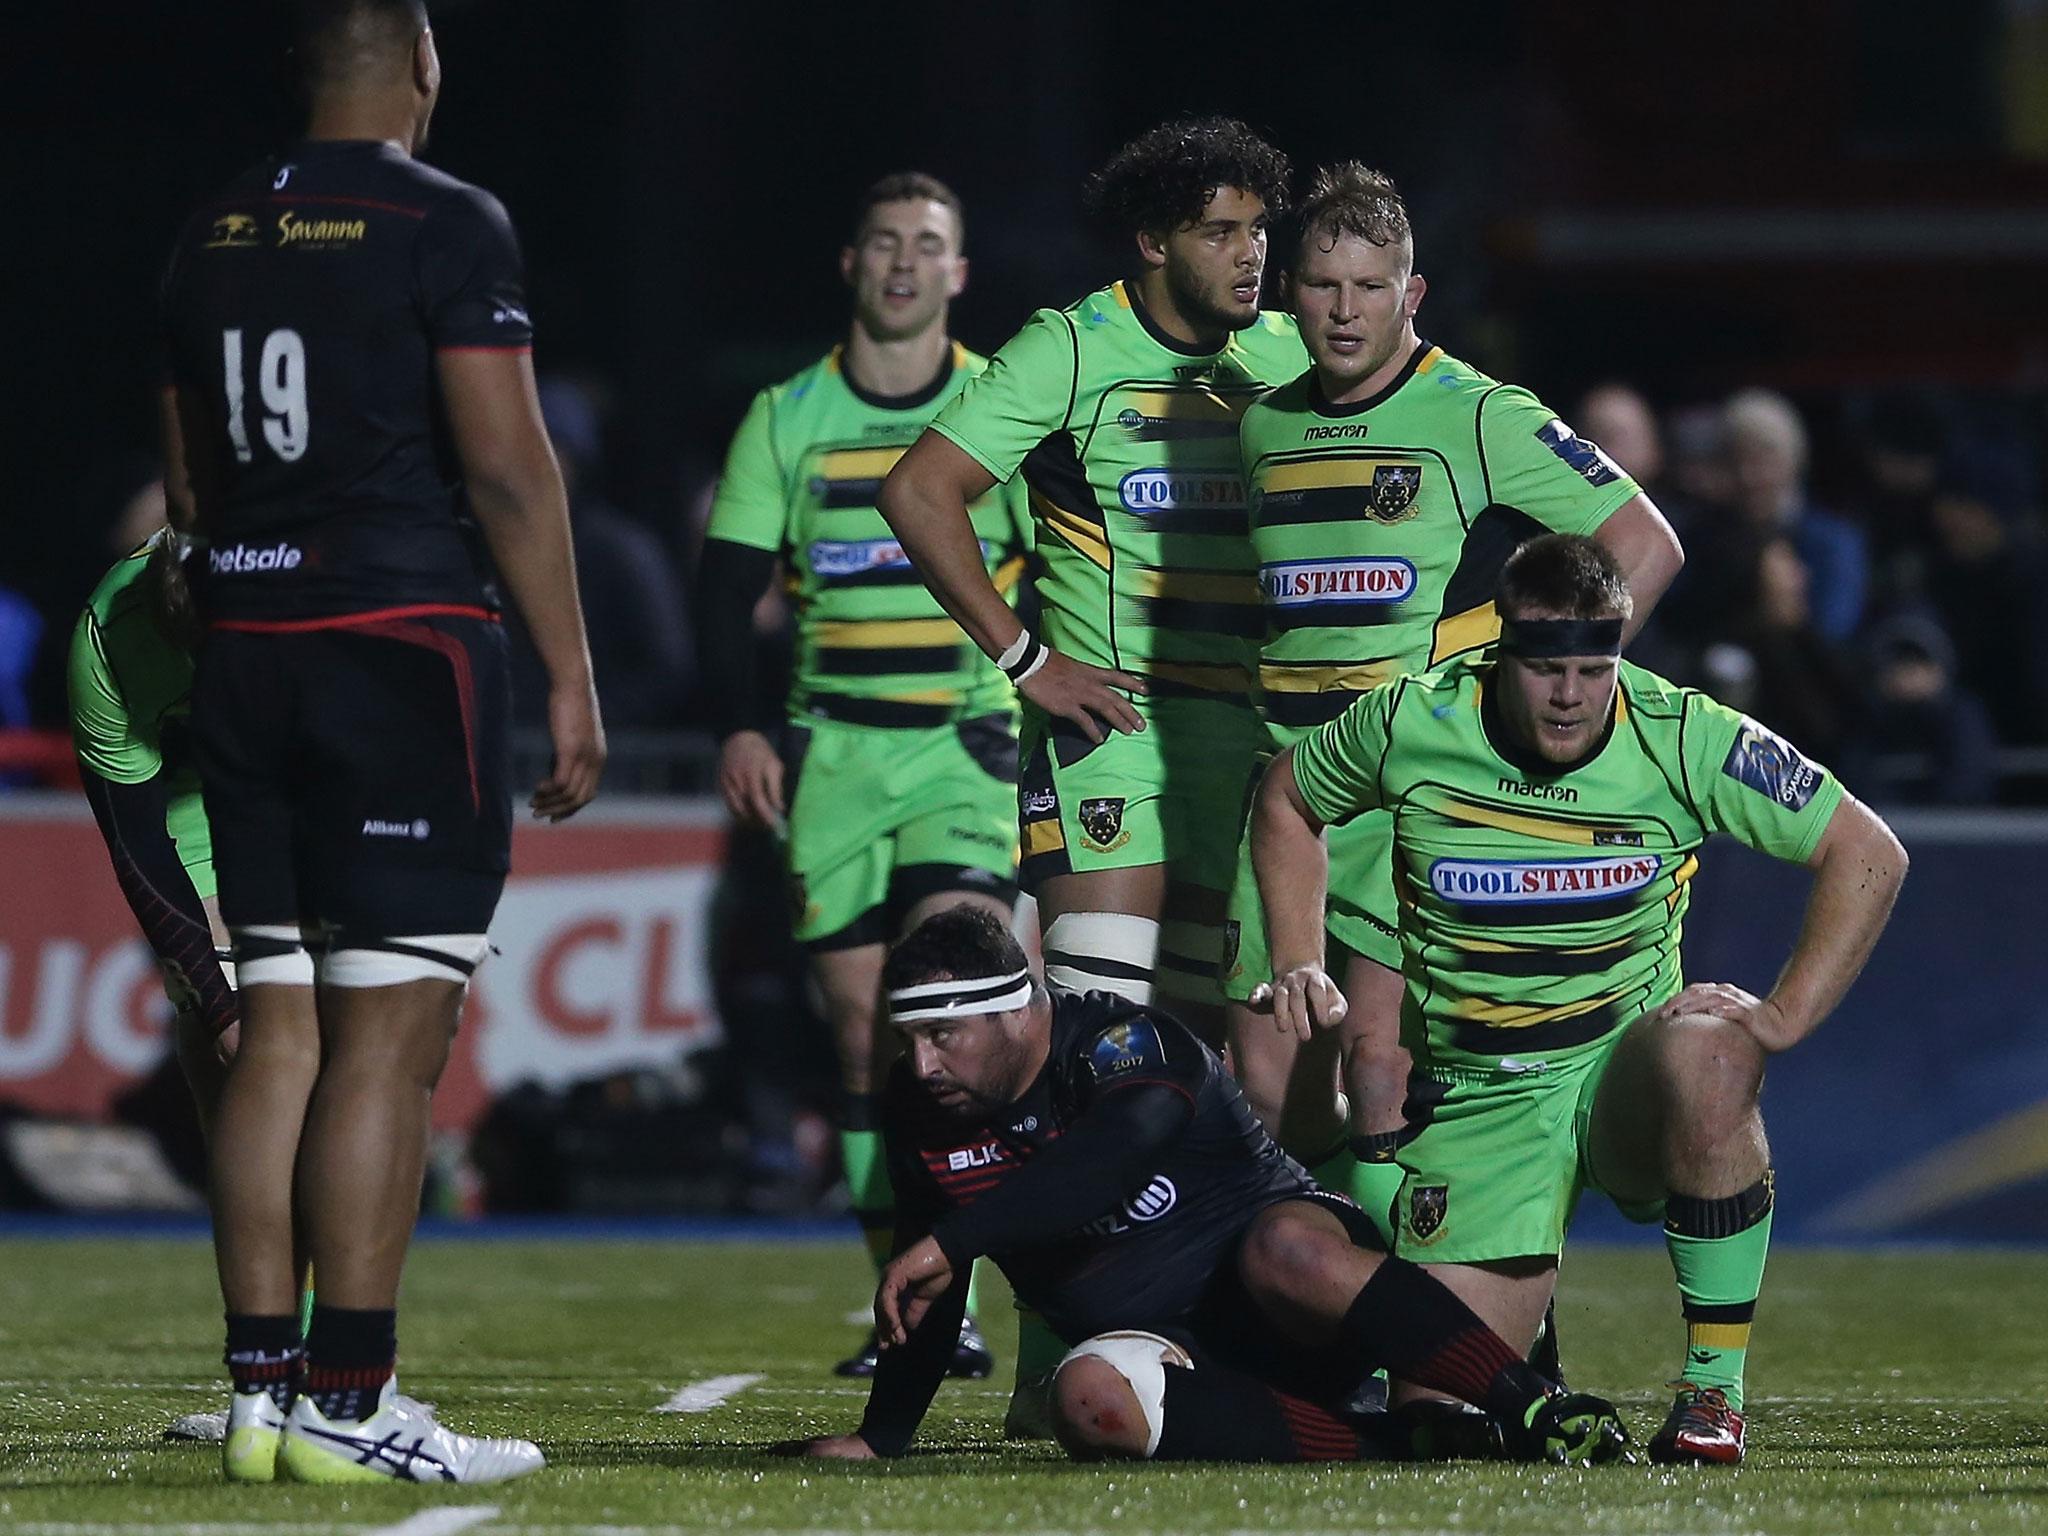 &#13;
Saints look dejected as they struggle to hold back Saracens &#13;